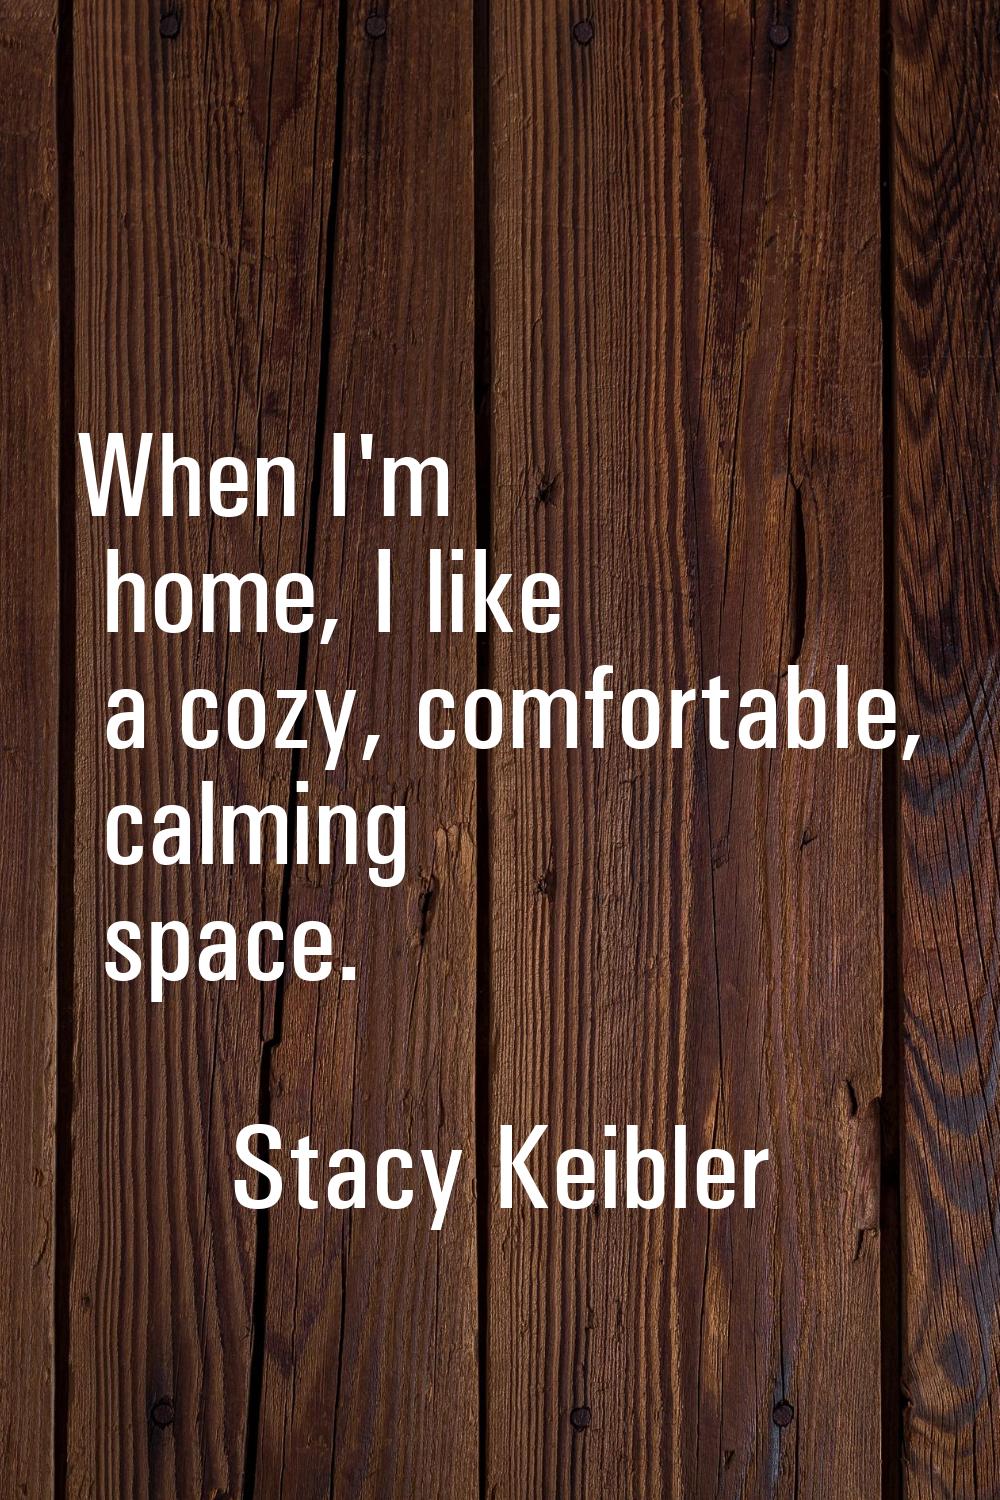 When I'm home, I like a cozy, comfortable, calming space.